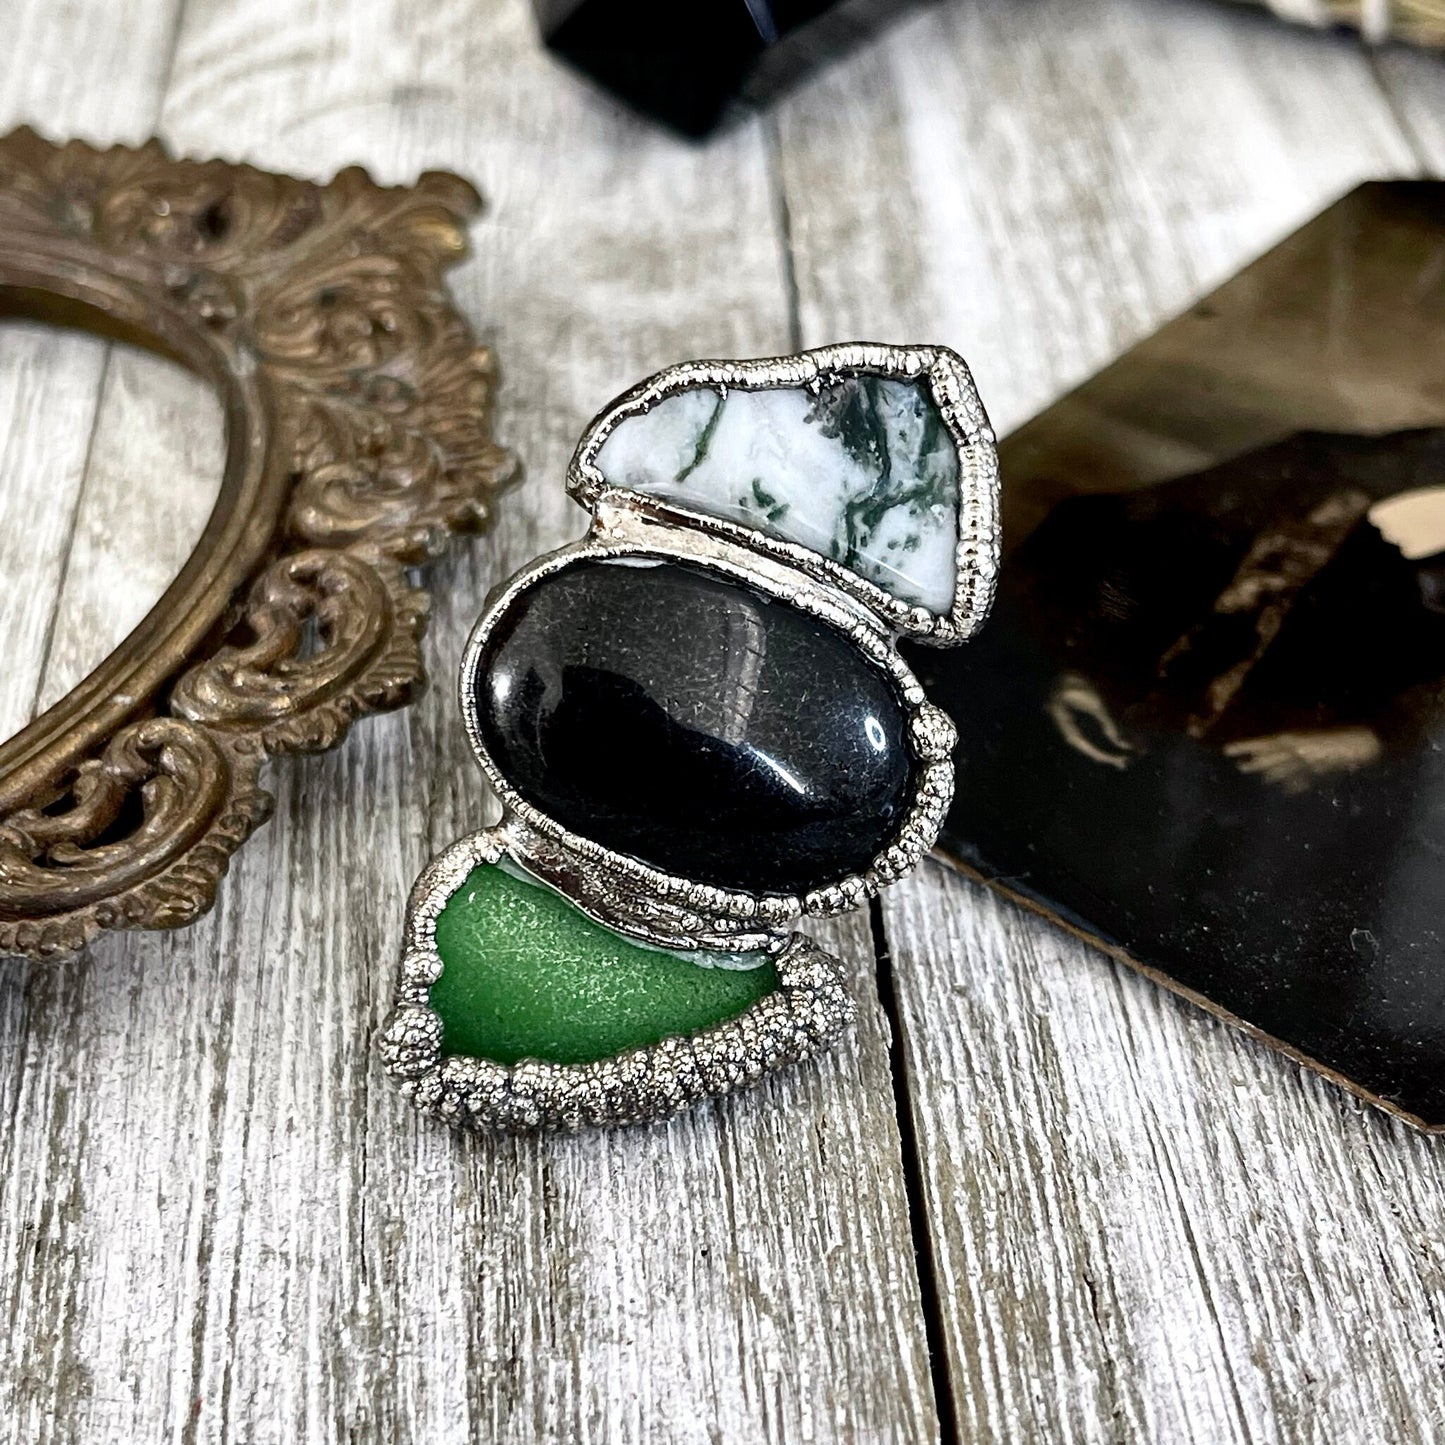 Size 8 Crystal Ring - Three Stone Black Onyx Sea Glass Moss Agate Ring Sliver / Foxlark Collection - One of a Kind / Crystal Jewelry